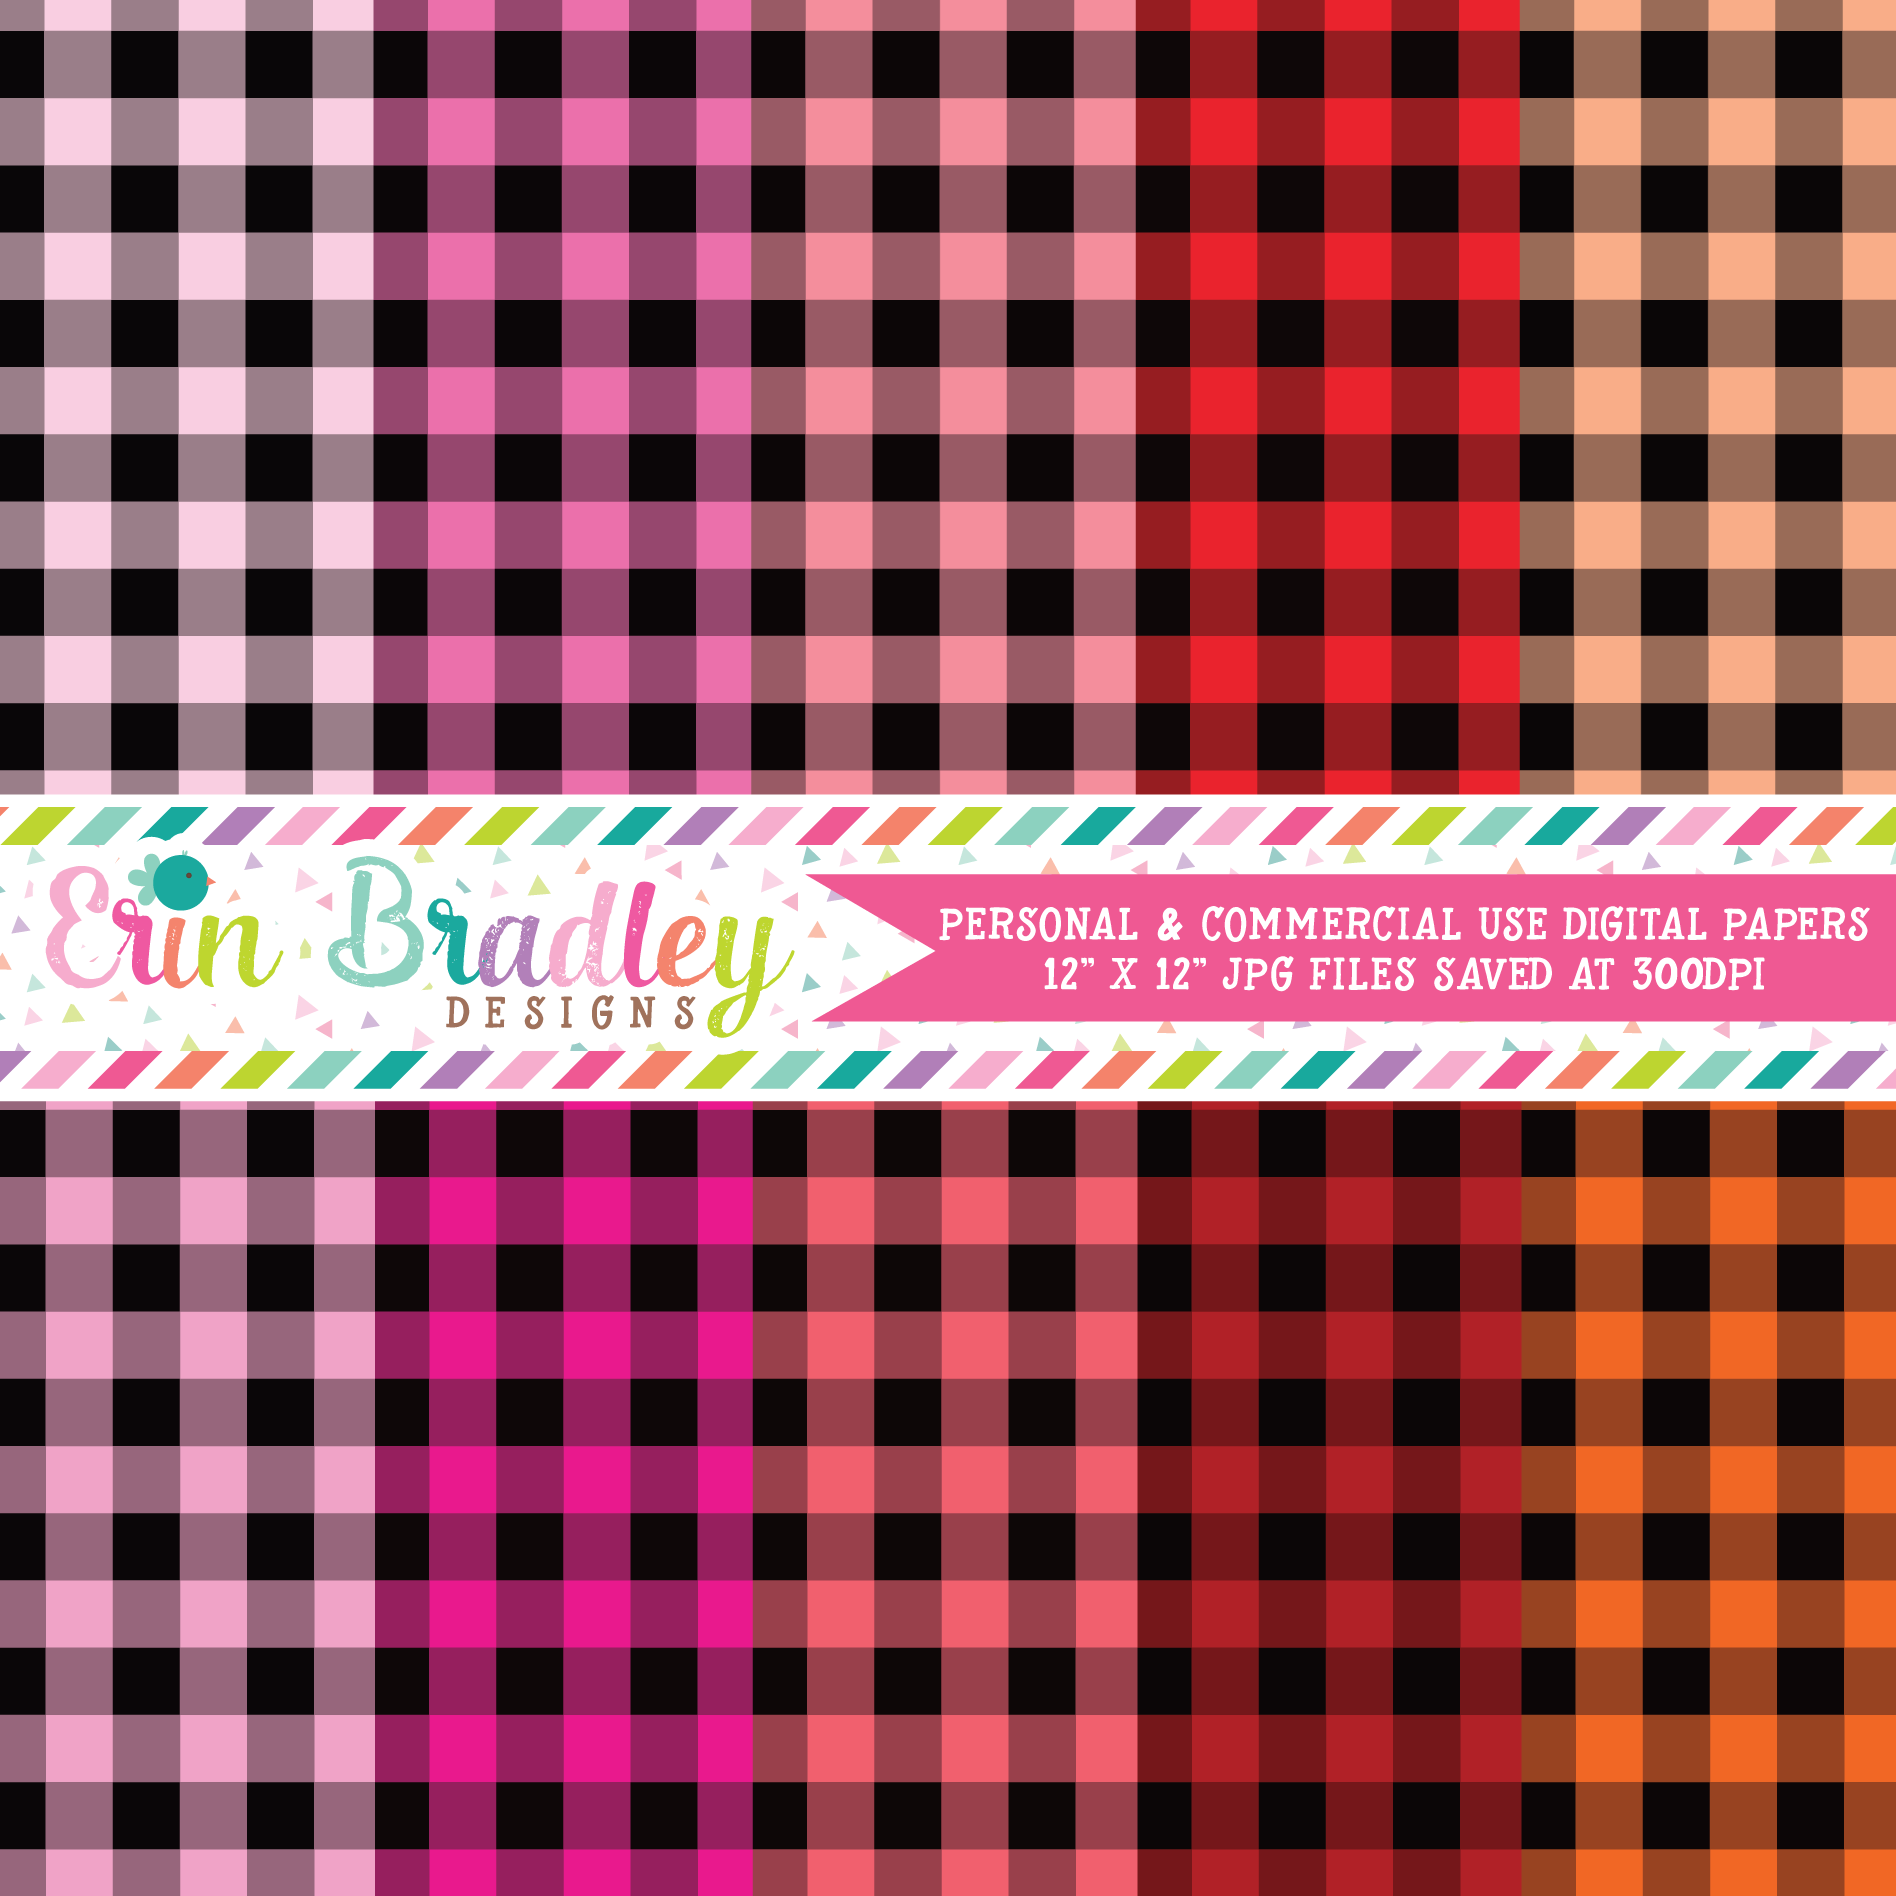 Buffalo Check Digital Paper Pack - Set Two - 40 Colors